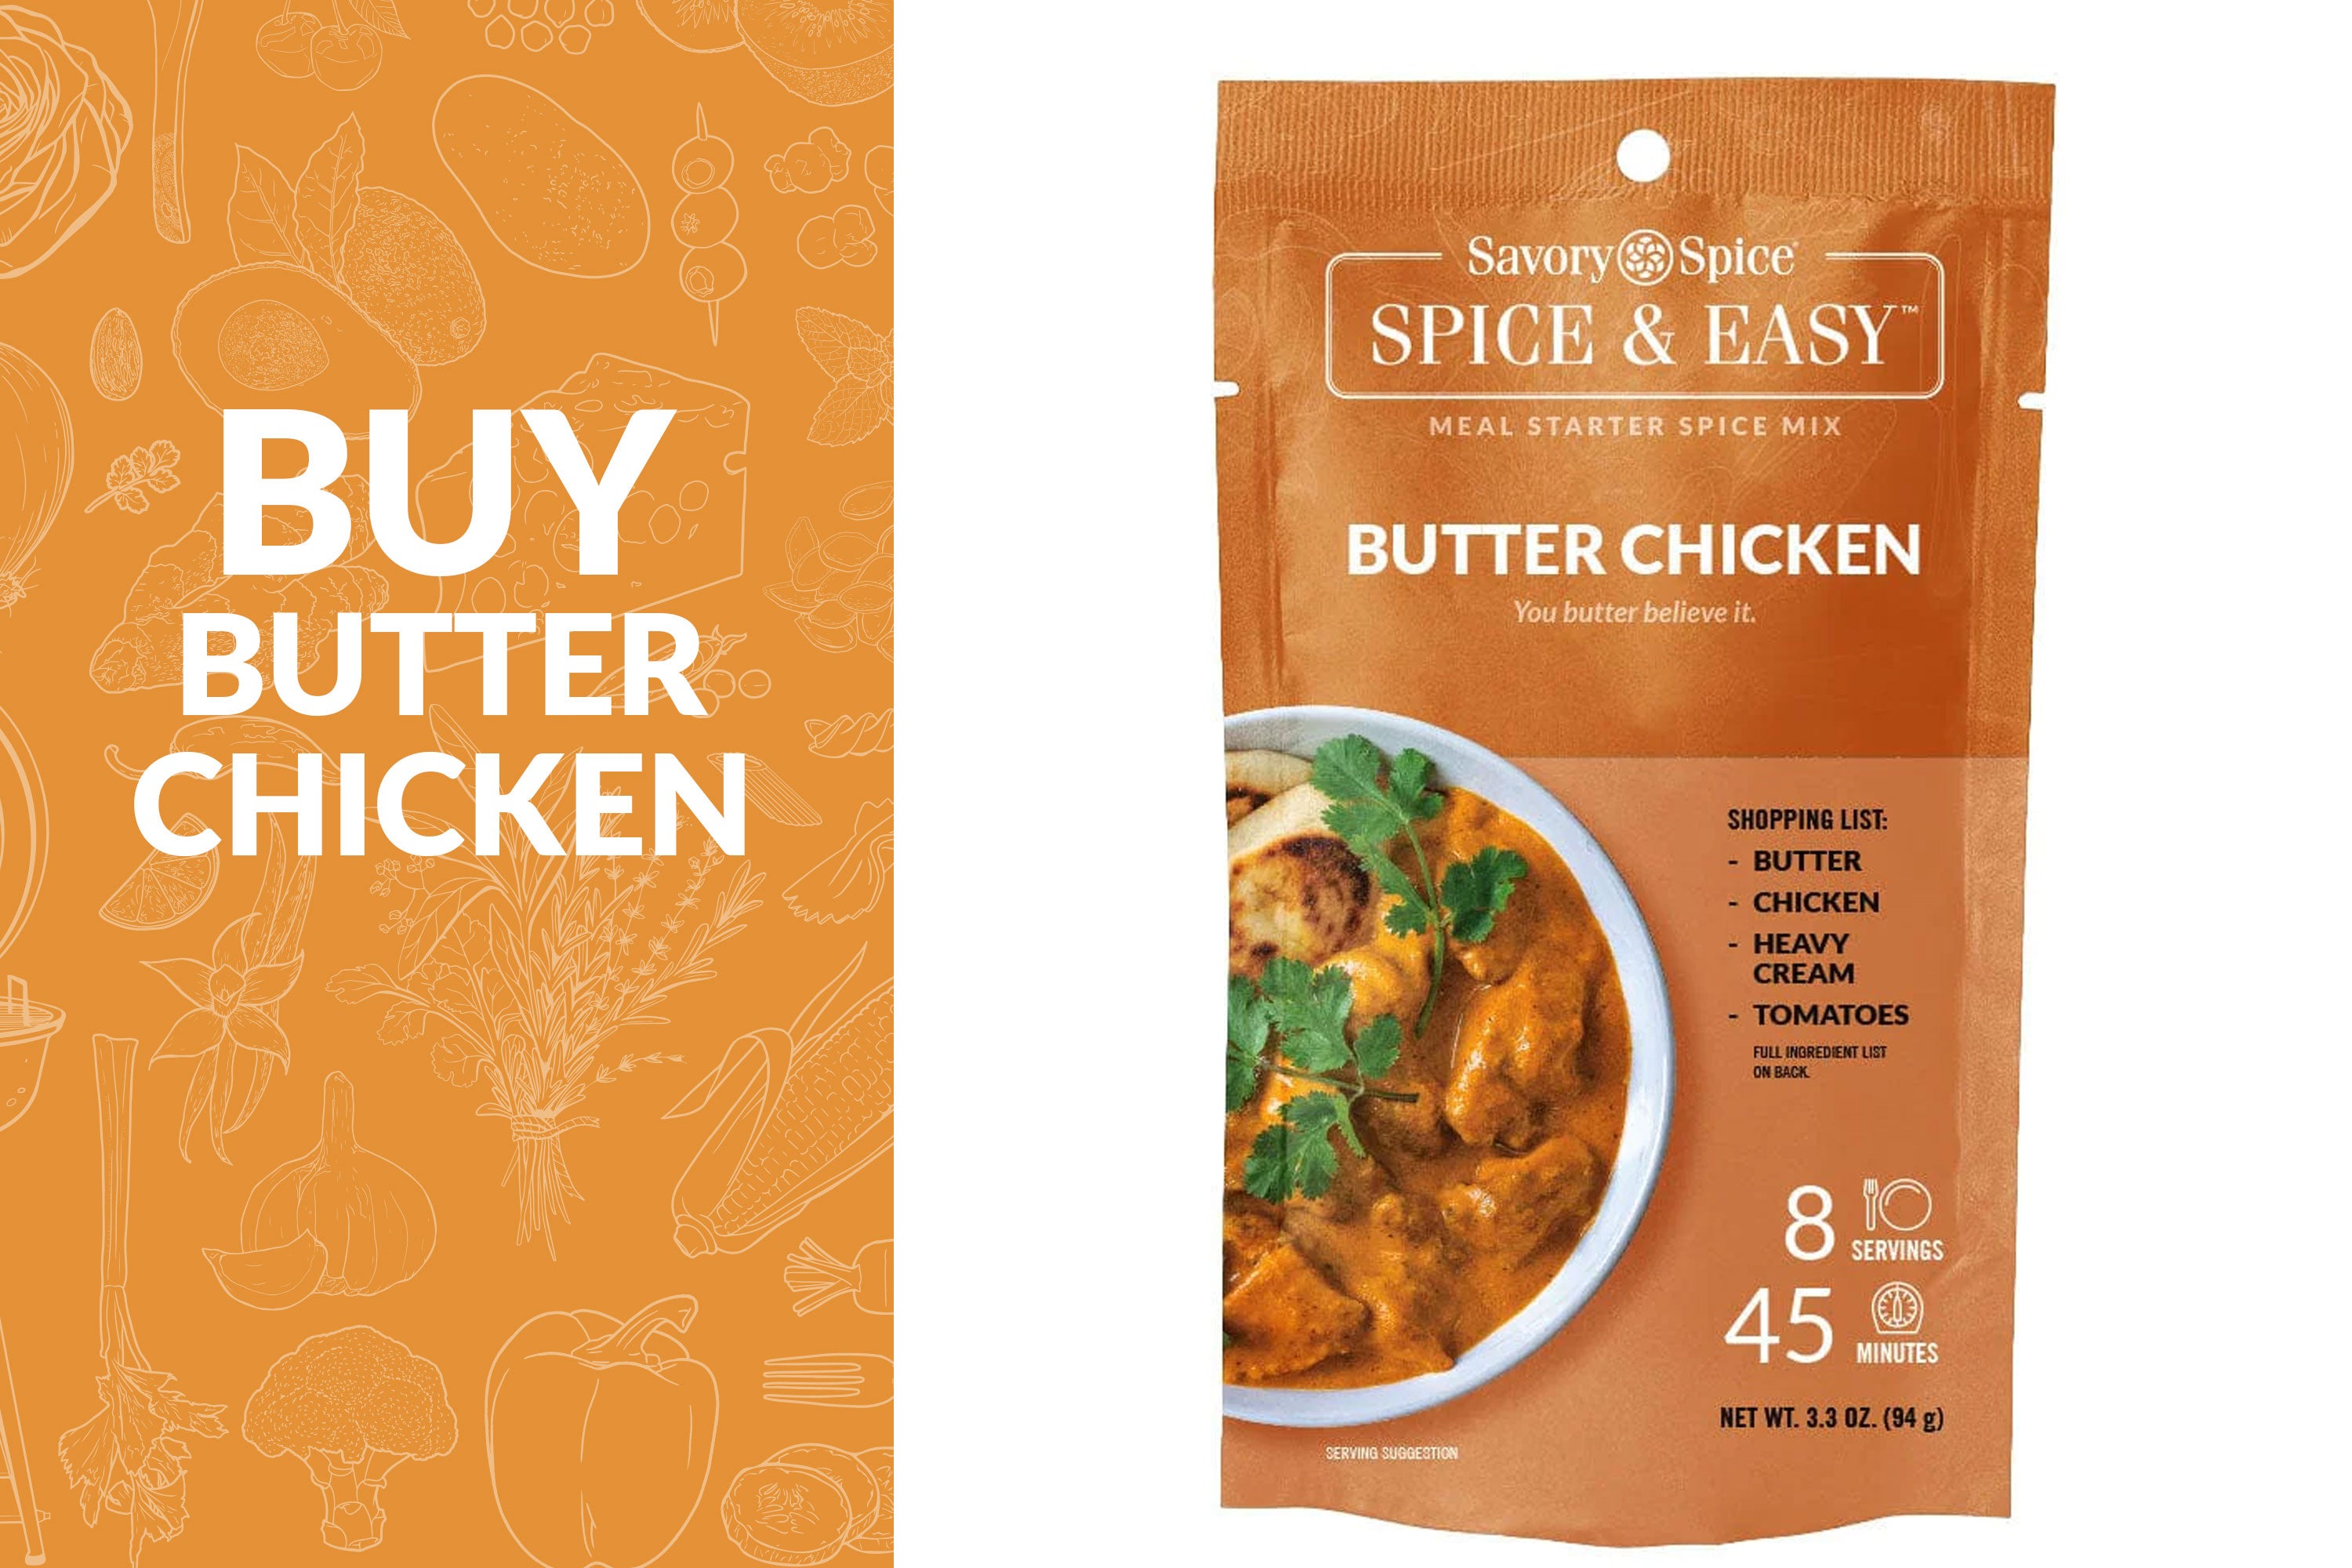 Buy Butter Chicken on left with Butter Chicken Spice & Easy on right